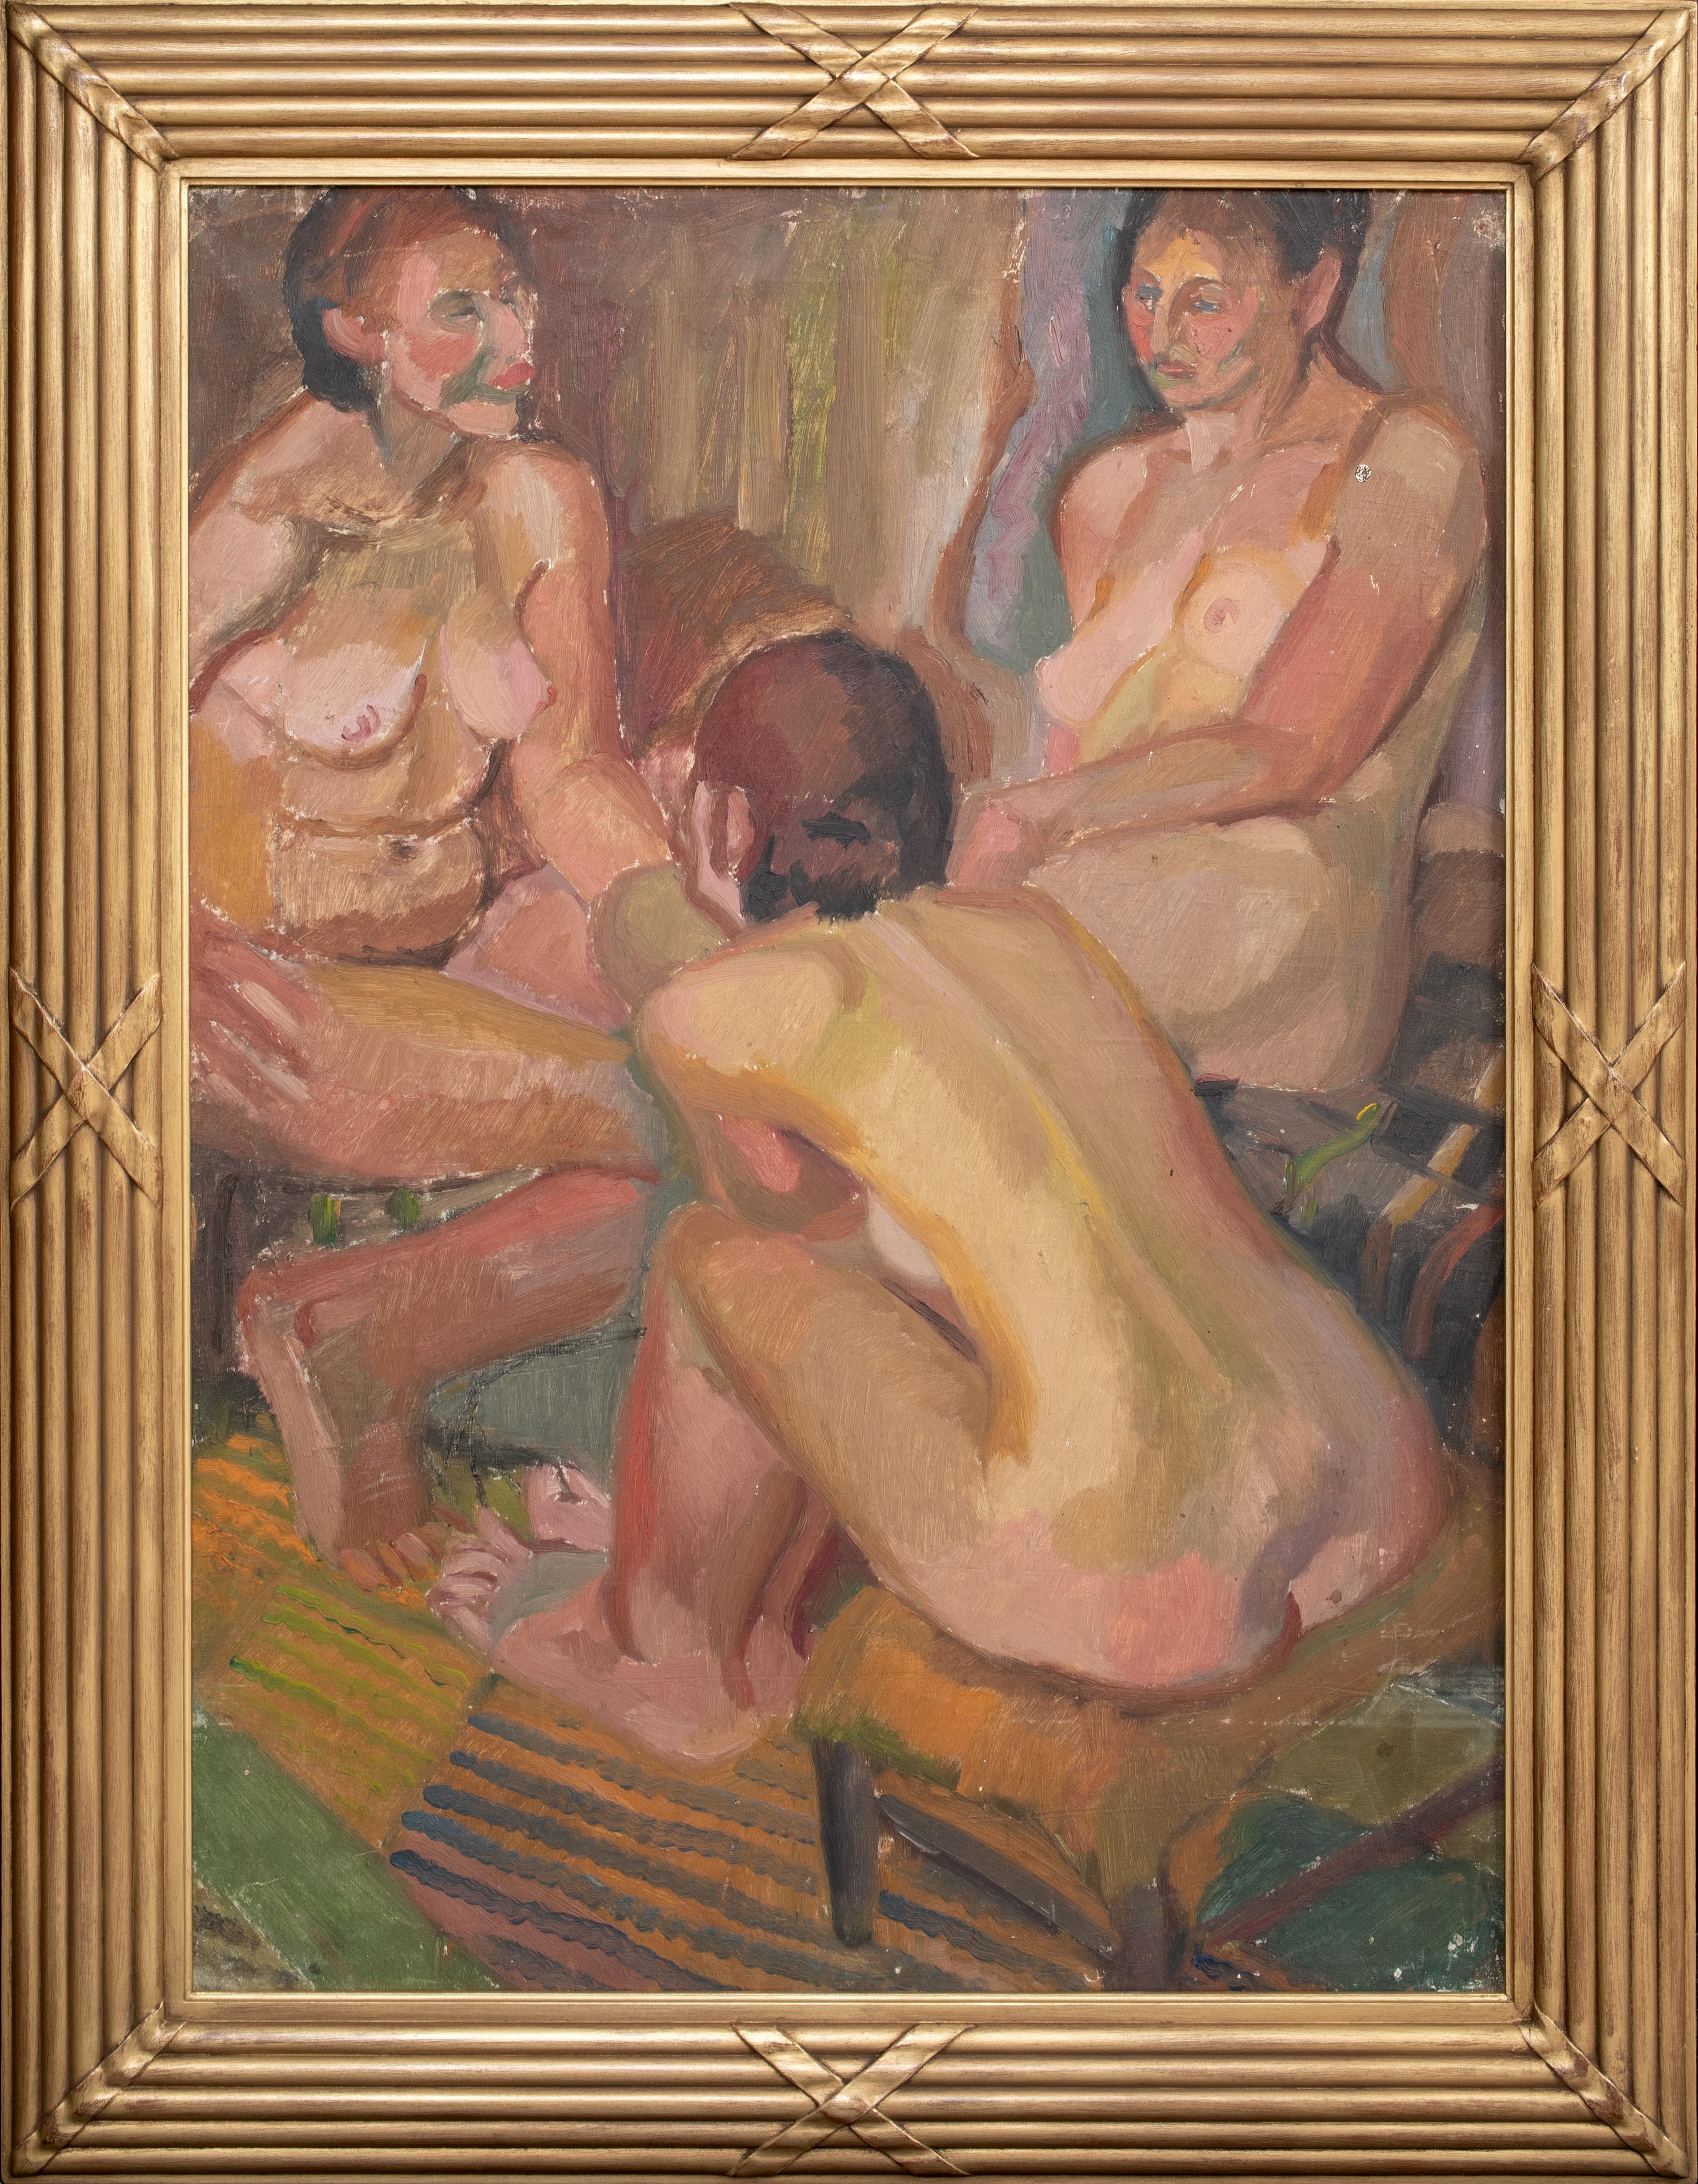 Unknown Nude Painting - Three Nudes, early 20th Century   by Harry Barr (1896-1987)